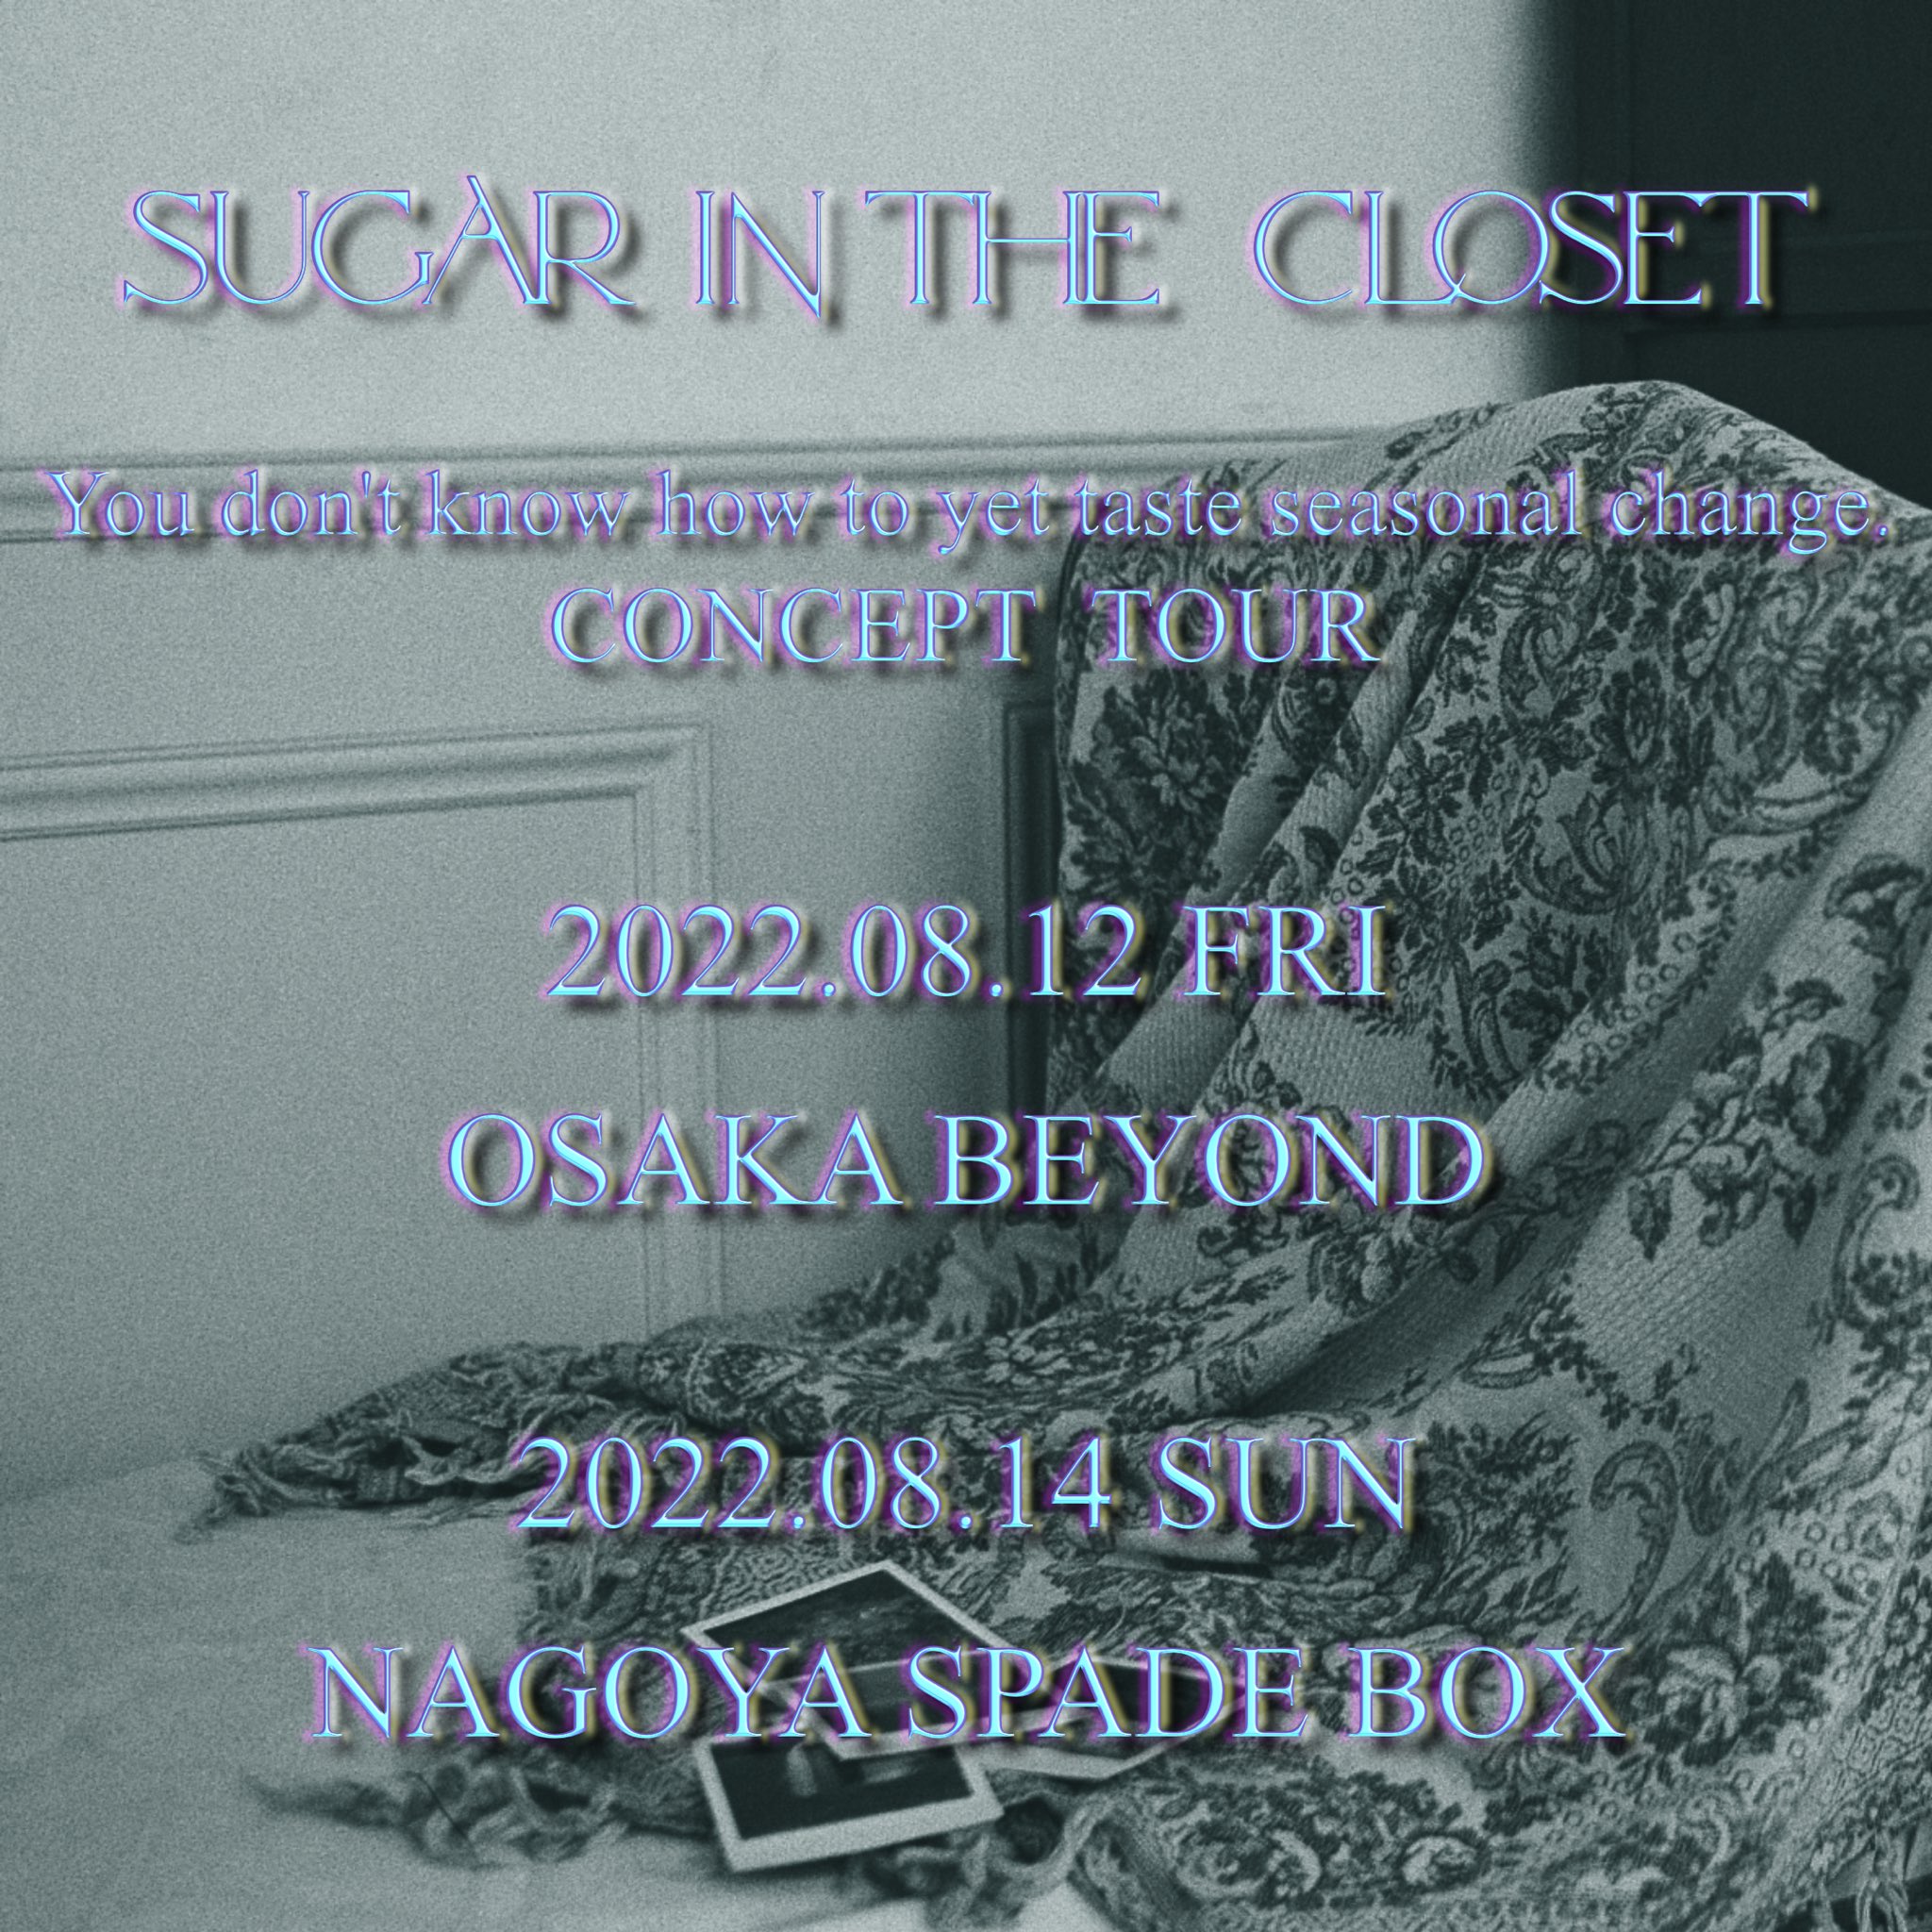 SUGAR IN THE CLOSET 2022 1st LIVE TOUR “You don’t know yet how to taste seasonal change.”